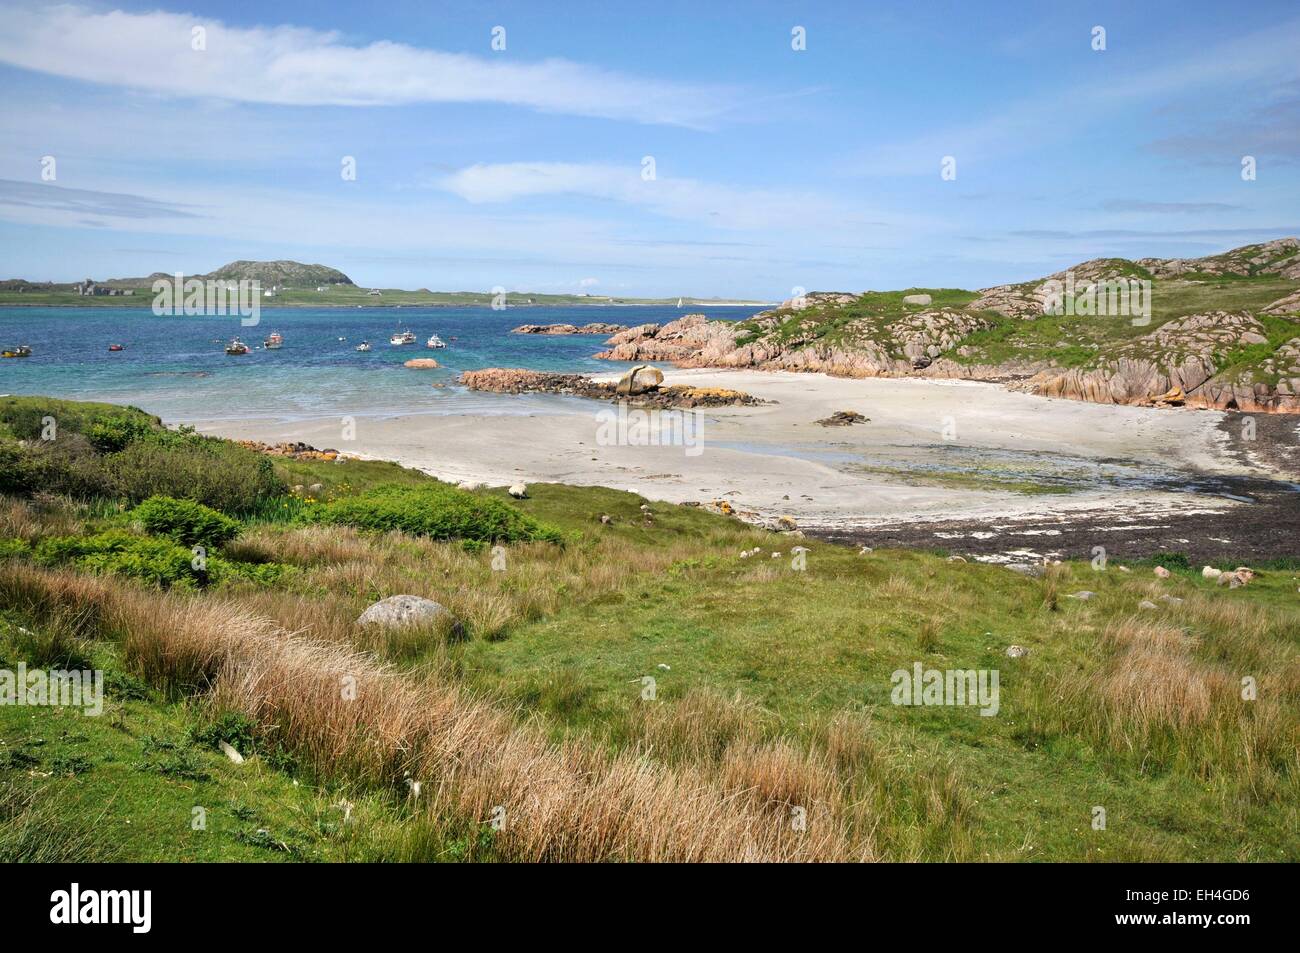 United Kingdom, Scotland, Isle of Mull, Fionnphort, extreme southwest of the island of Mull, The Ross of Mull, Knockvologan beach, Iona Island in the background Stock Photo